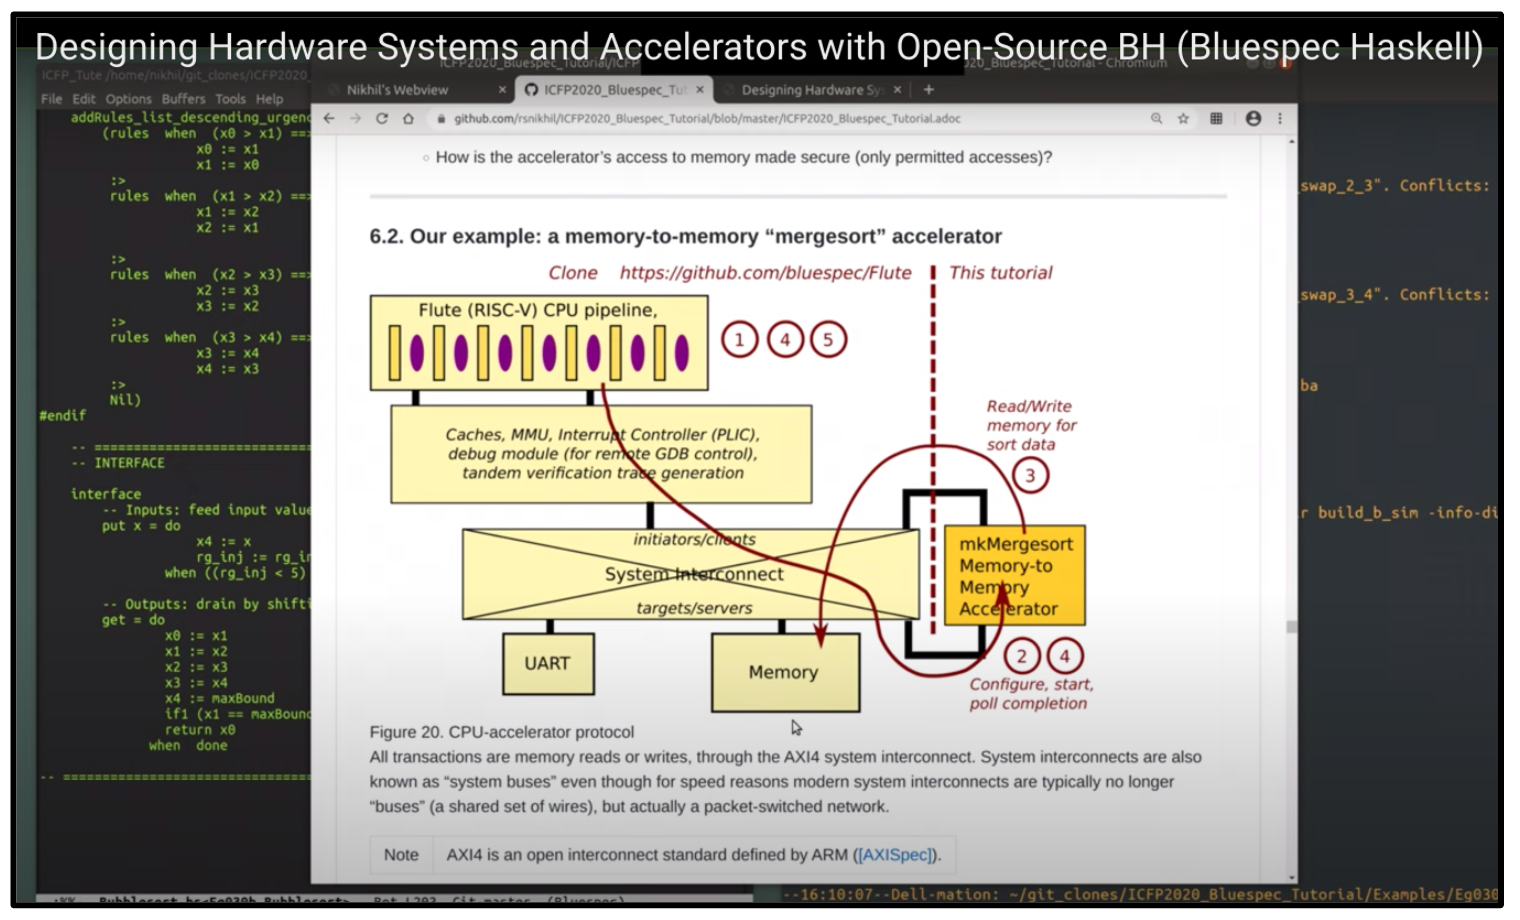 Watch Bluespec CTO Demo BSV & BH for RISC-V Open Source Hardware Accelerator at International Conference on Functional Programming